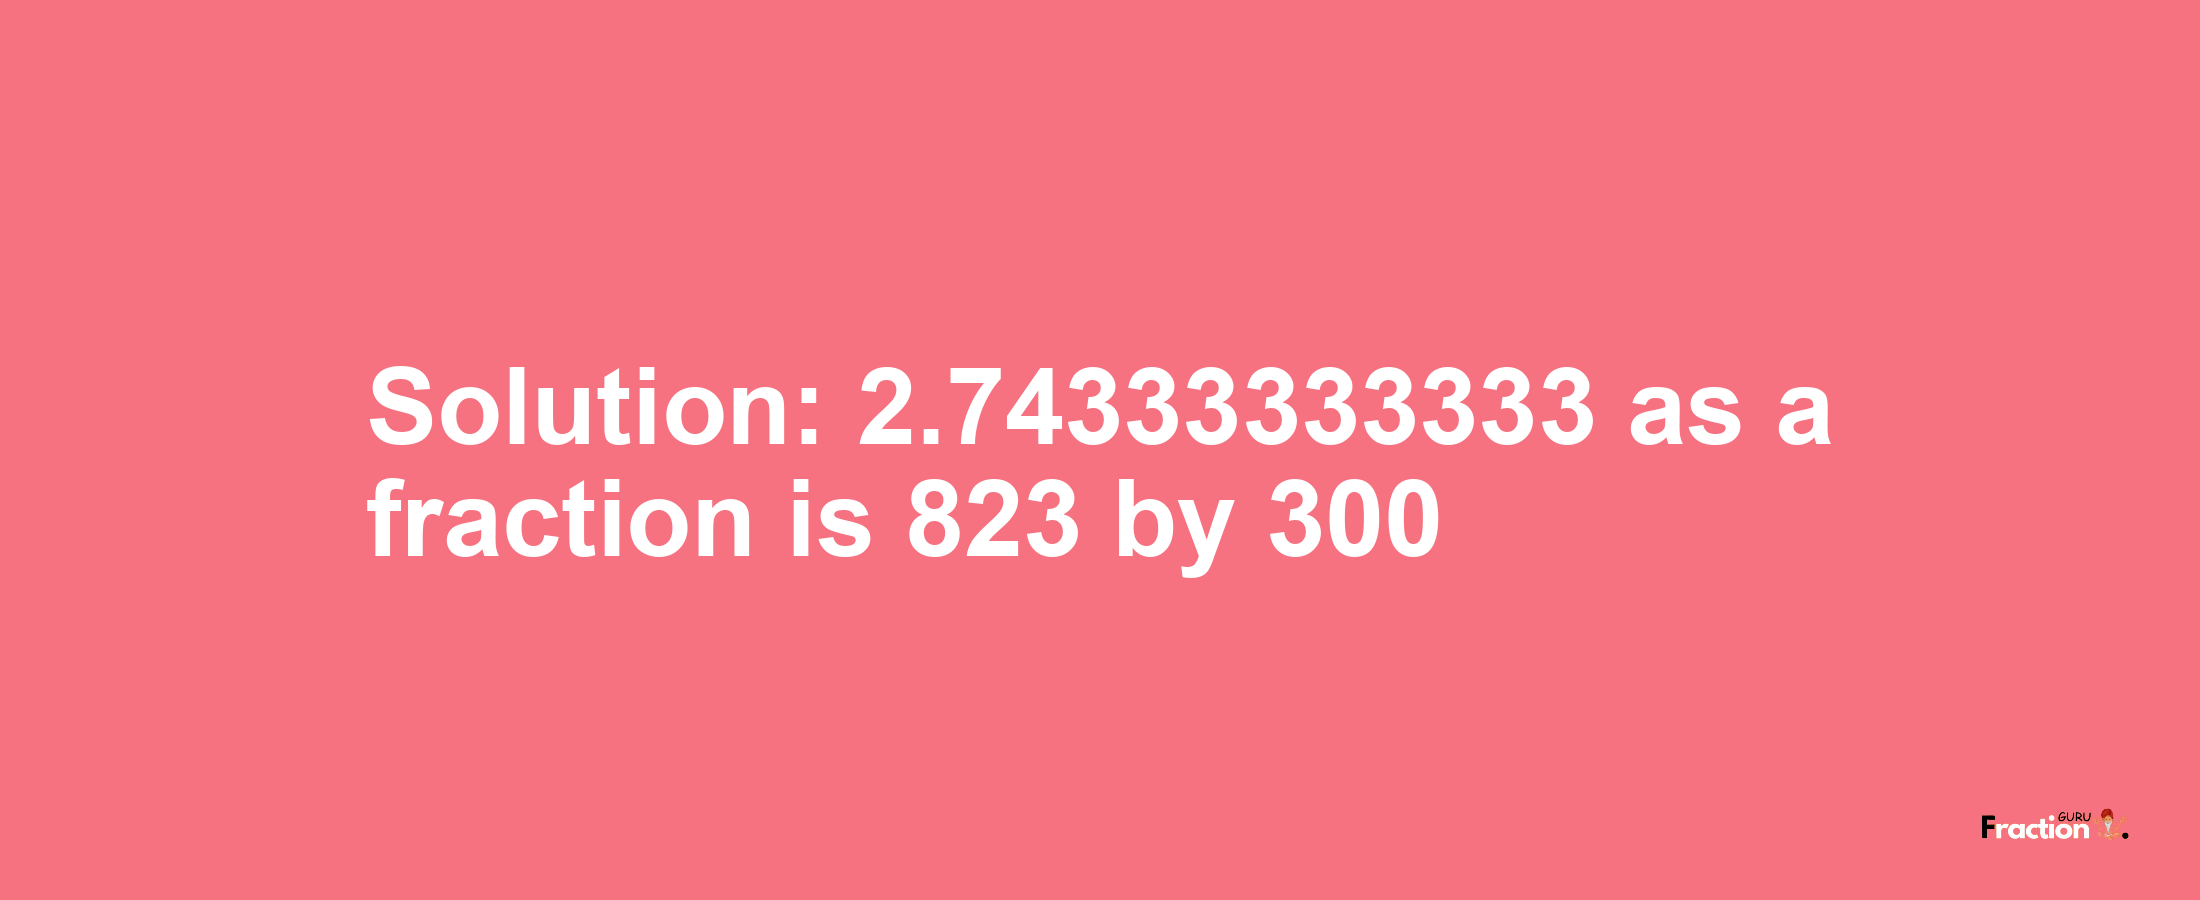 Solution:2.74333333333 as a fraction is 823/300